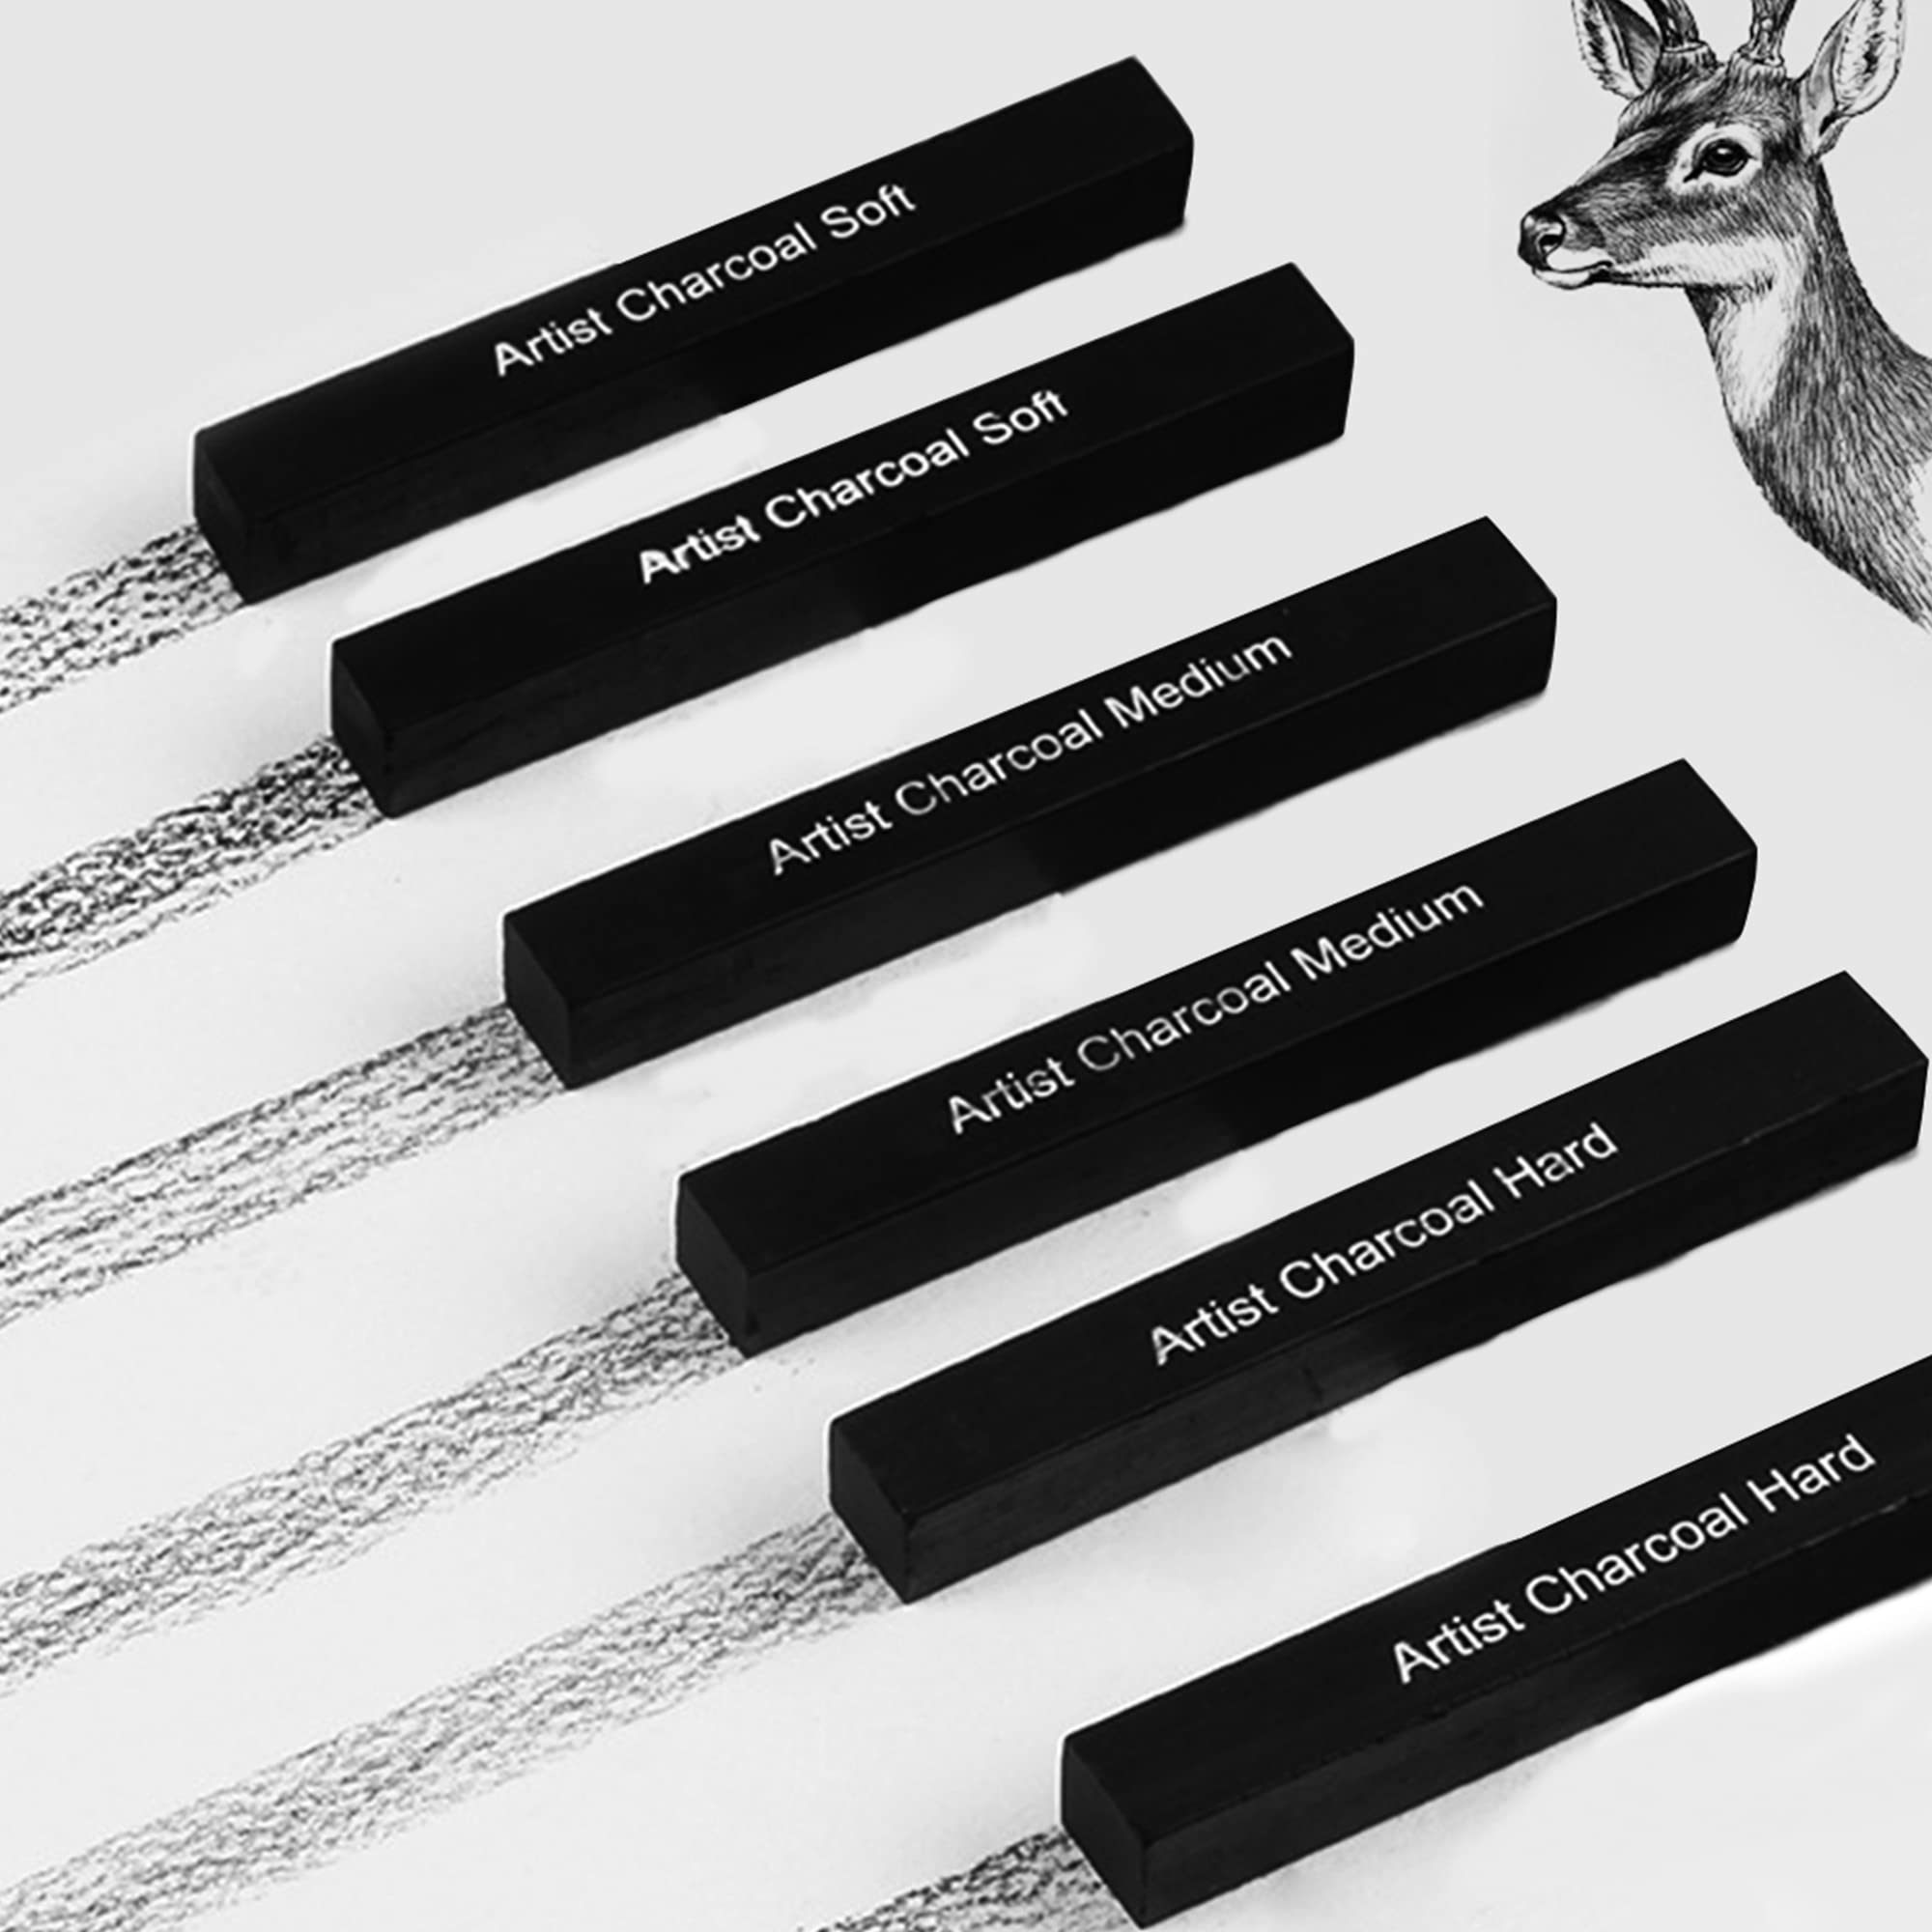 ANNECOSK 6 Pack Compressed-Charcoal-Sticks Vine Charcoal Sticks for Drawing  Sketching Shading Art Supplies Sketch Kits Tools Soft Medium and Hard Grade  6Pack charcoal stick